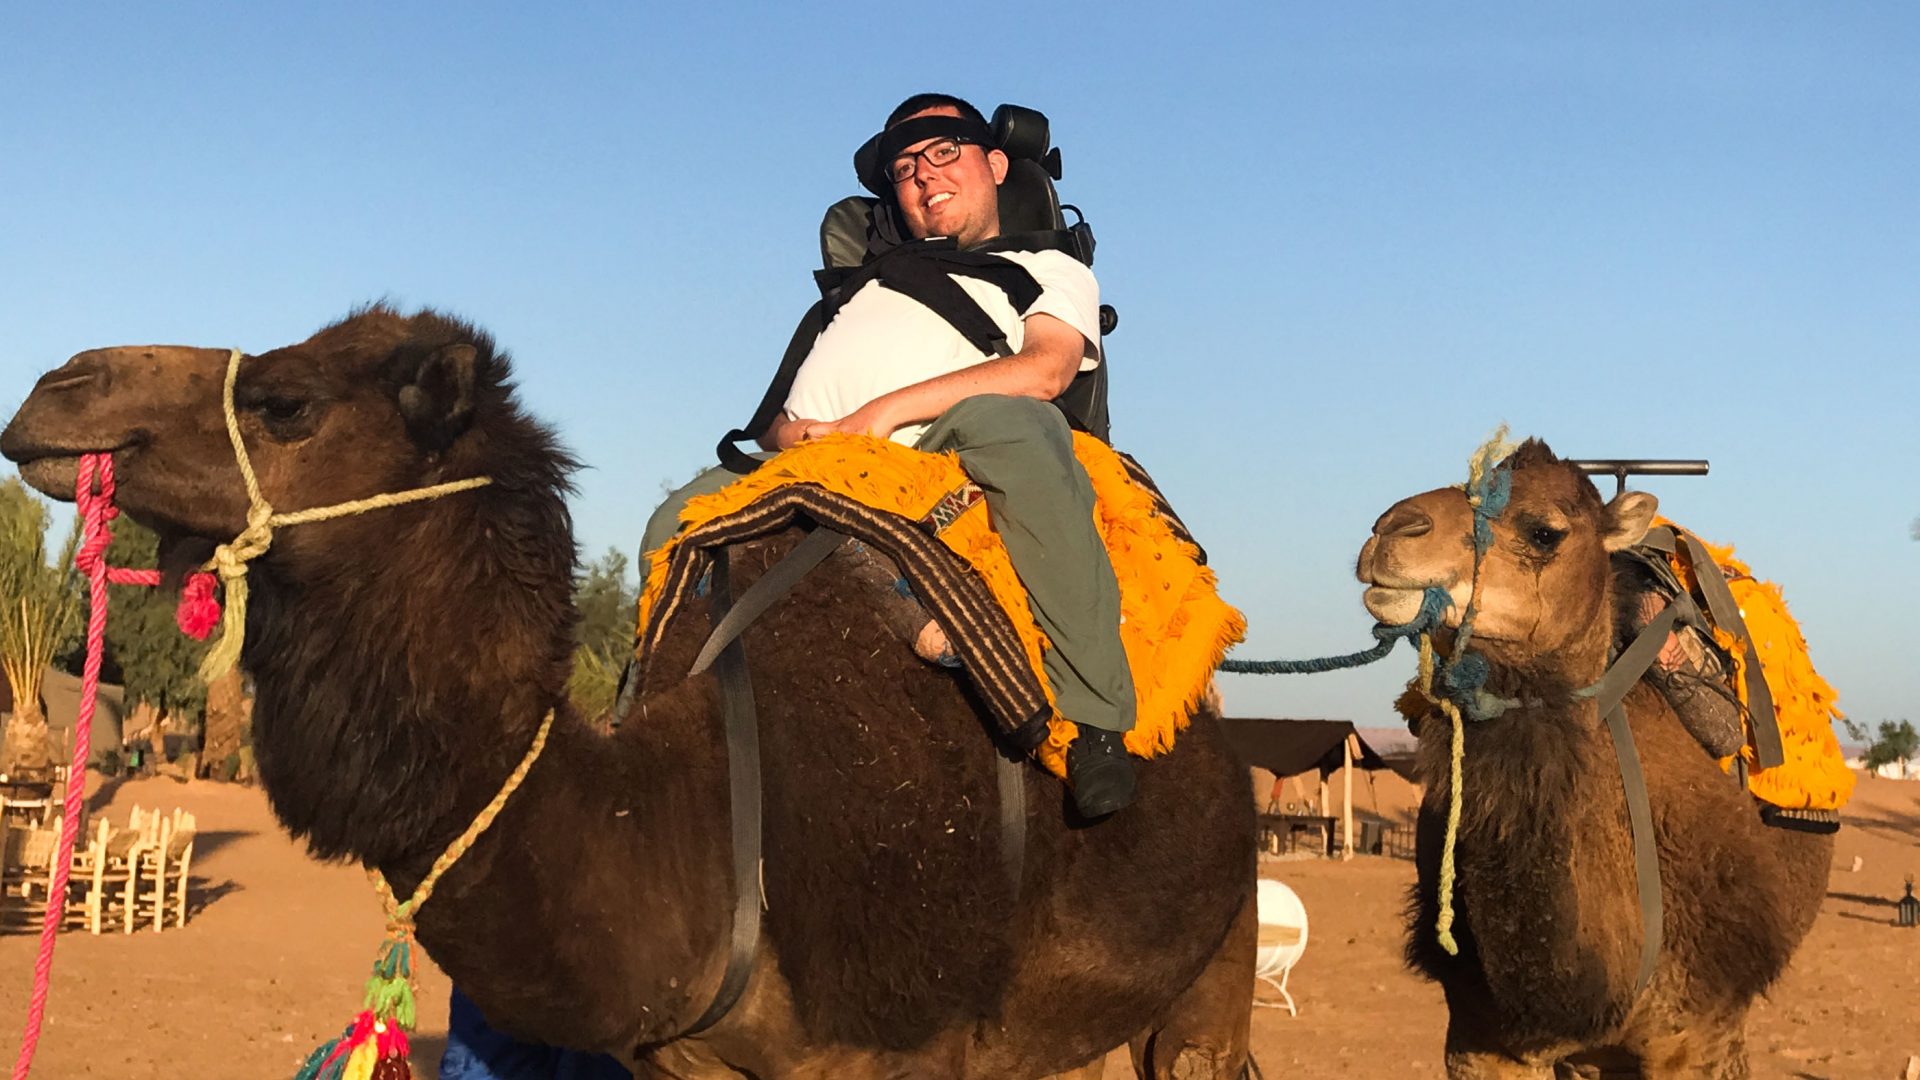 Cory Lee rides a camel during his travels.